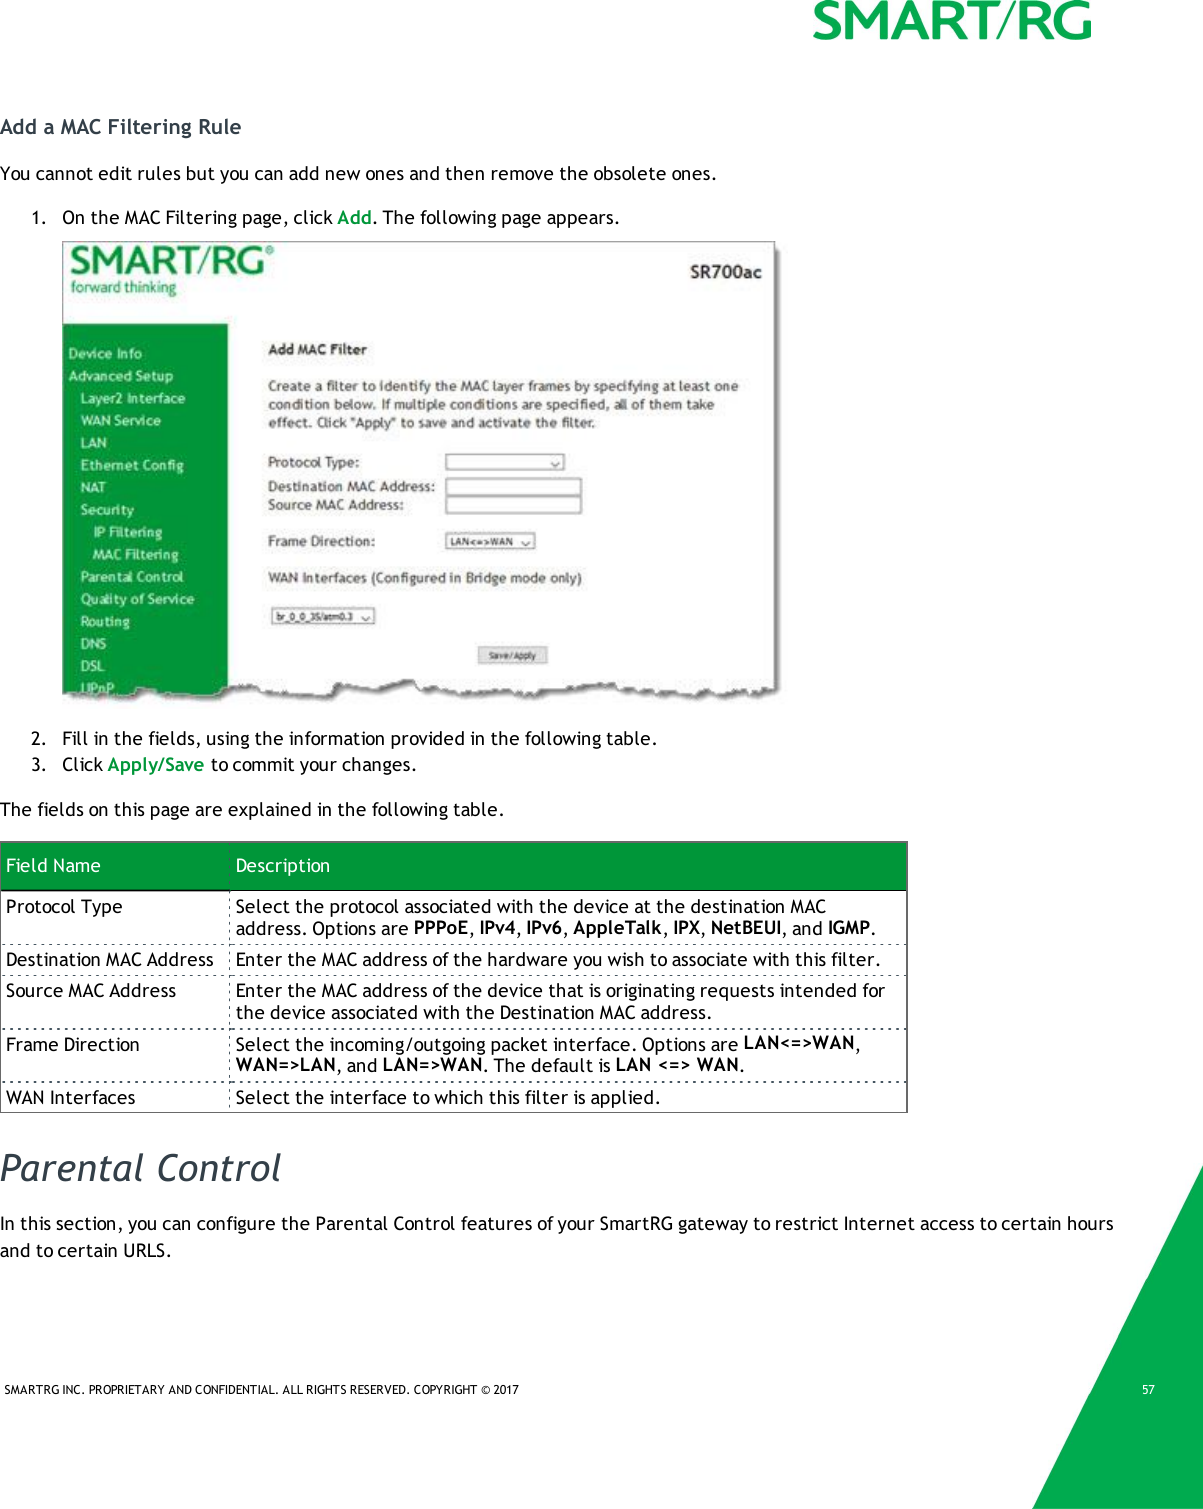 SMARTRG INC. PROPRIETARY AND CONFIDENTIAL. ALL RIGHTS RESERVED. COPYRIGHT © 2017 57Add a MAC Filtering RuleYou cannot edit rules but you can add new ones and then remove the obsolete ones.1. On the MAC Filtering page, click Add. The following page appears.2. Fill in the fields, using the information provided in the following table.3. Click Apply/Save to commit your changes.The fields on this page are explained in the following table.Field Name DescriptionProtocol Type Select the protocol associated with the device at the destination MACaddress. Options are PPPoE,IPv4,IPv6,AppleTalk,IPX,NetBEUI, and IGMP.Destination MAC Address Enter the MAC address of the hardware you wish to associate with this filter.Source MAC Address Enter the MAC address of the device that is originating requests intended forthe device associated with the Destination MAC address.Frame Direction Select the incoming/outgoing packet interface. Options are LAN&lt;=&gt;WAN,WAN=&gt;LAN, and LAN=&gt;WAN. The default is LAN &lt;=&gt; WAN.WAN Interfaces Select the interface to which this filter is applied.Parental ControlIn this section, you can configure the Parental Control features of your SmartRG gateway to restrict Internet access to certain hoursand to certain URLS.